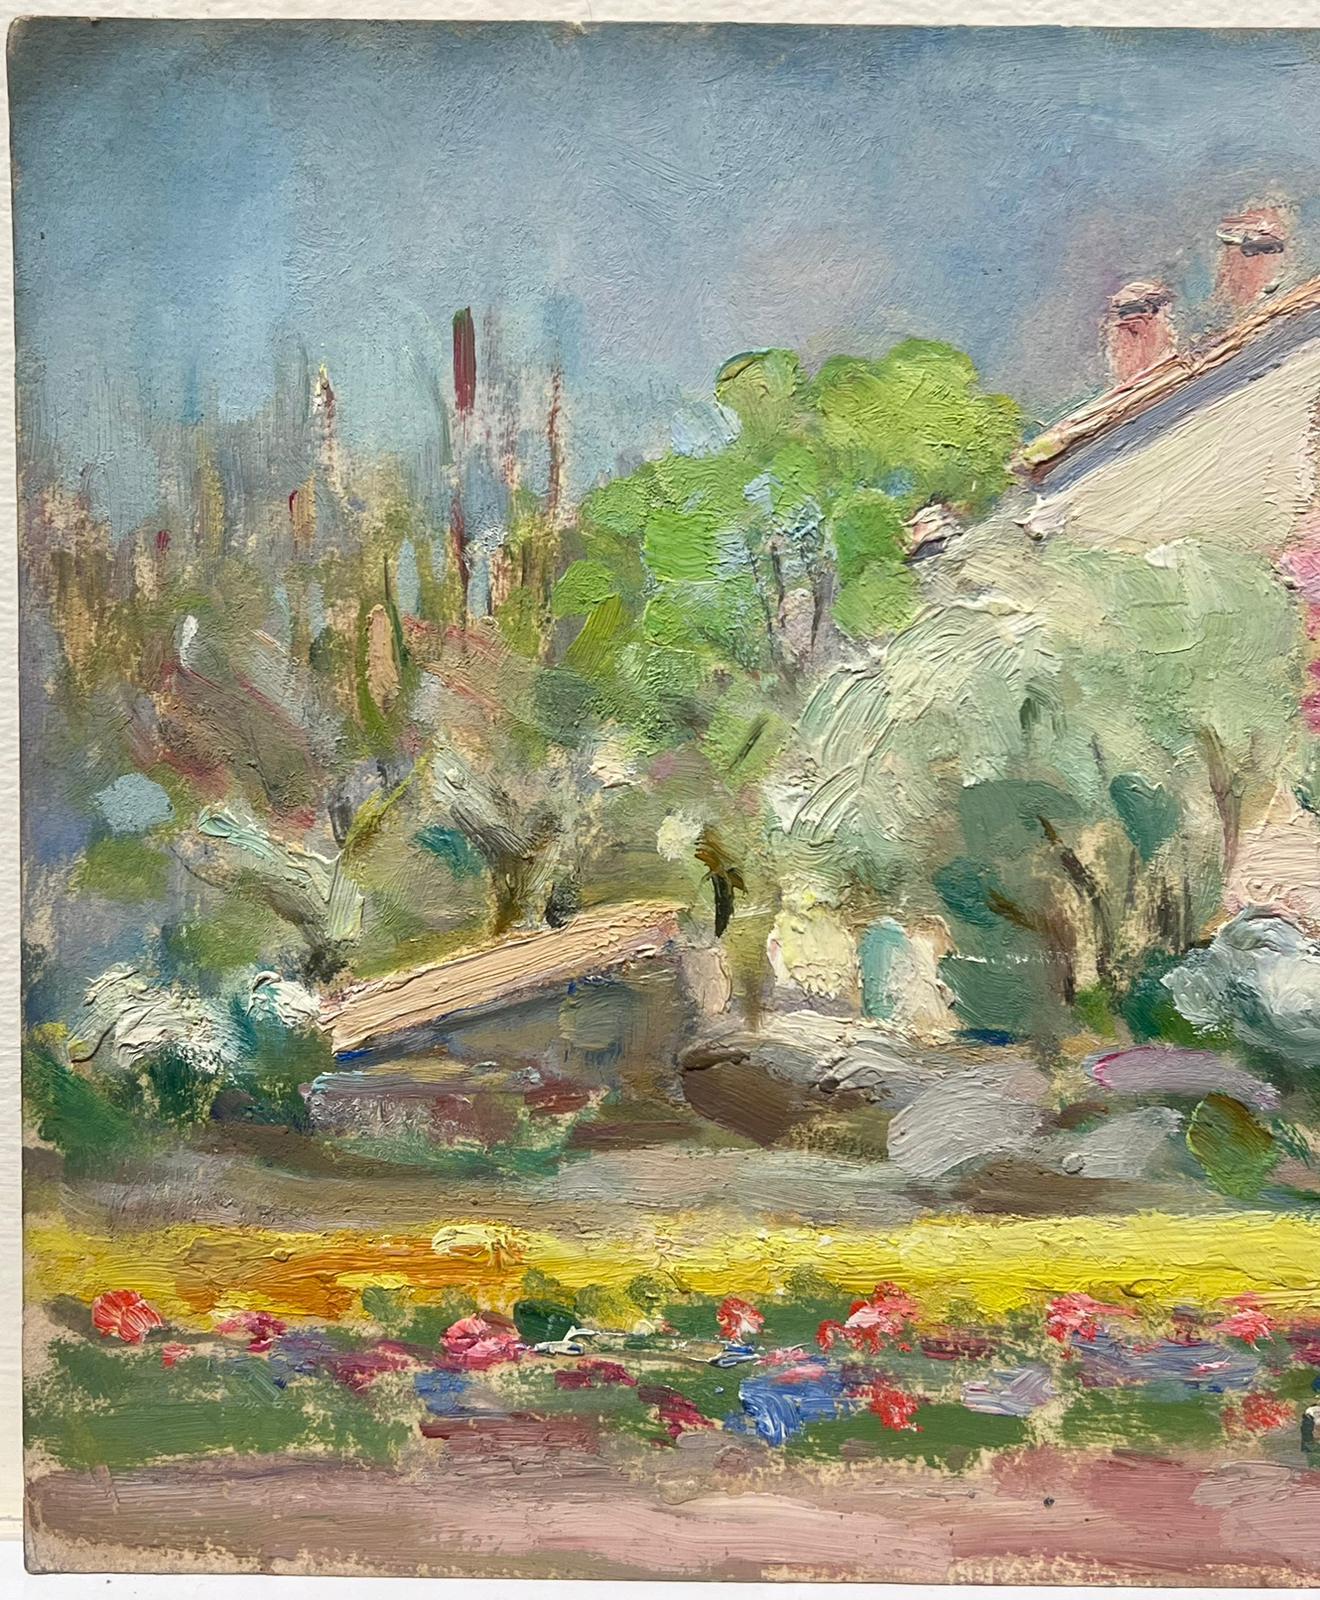 House Around The Flowers
by Louise Alix (French, 1888-1980) *see notes below
provenance stamp to the back 
oil painting on board, unframed
measures: 7.5 high by 10.75 inches wide
condition: overall very good and sound, a few scuffs and marks to the